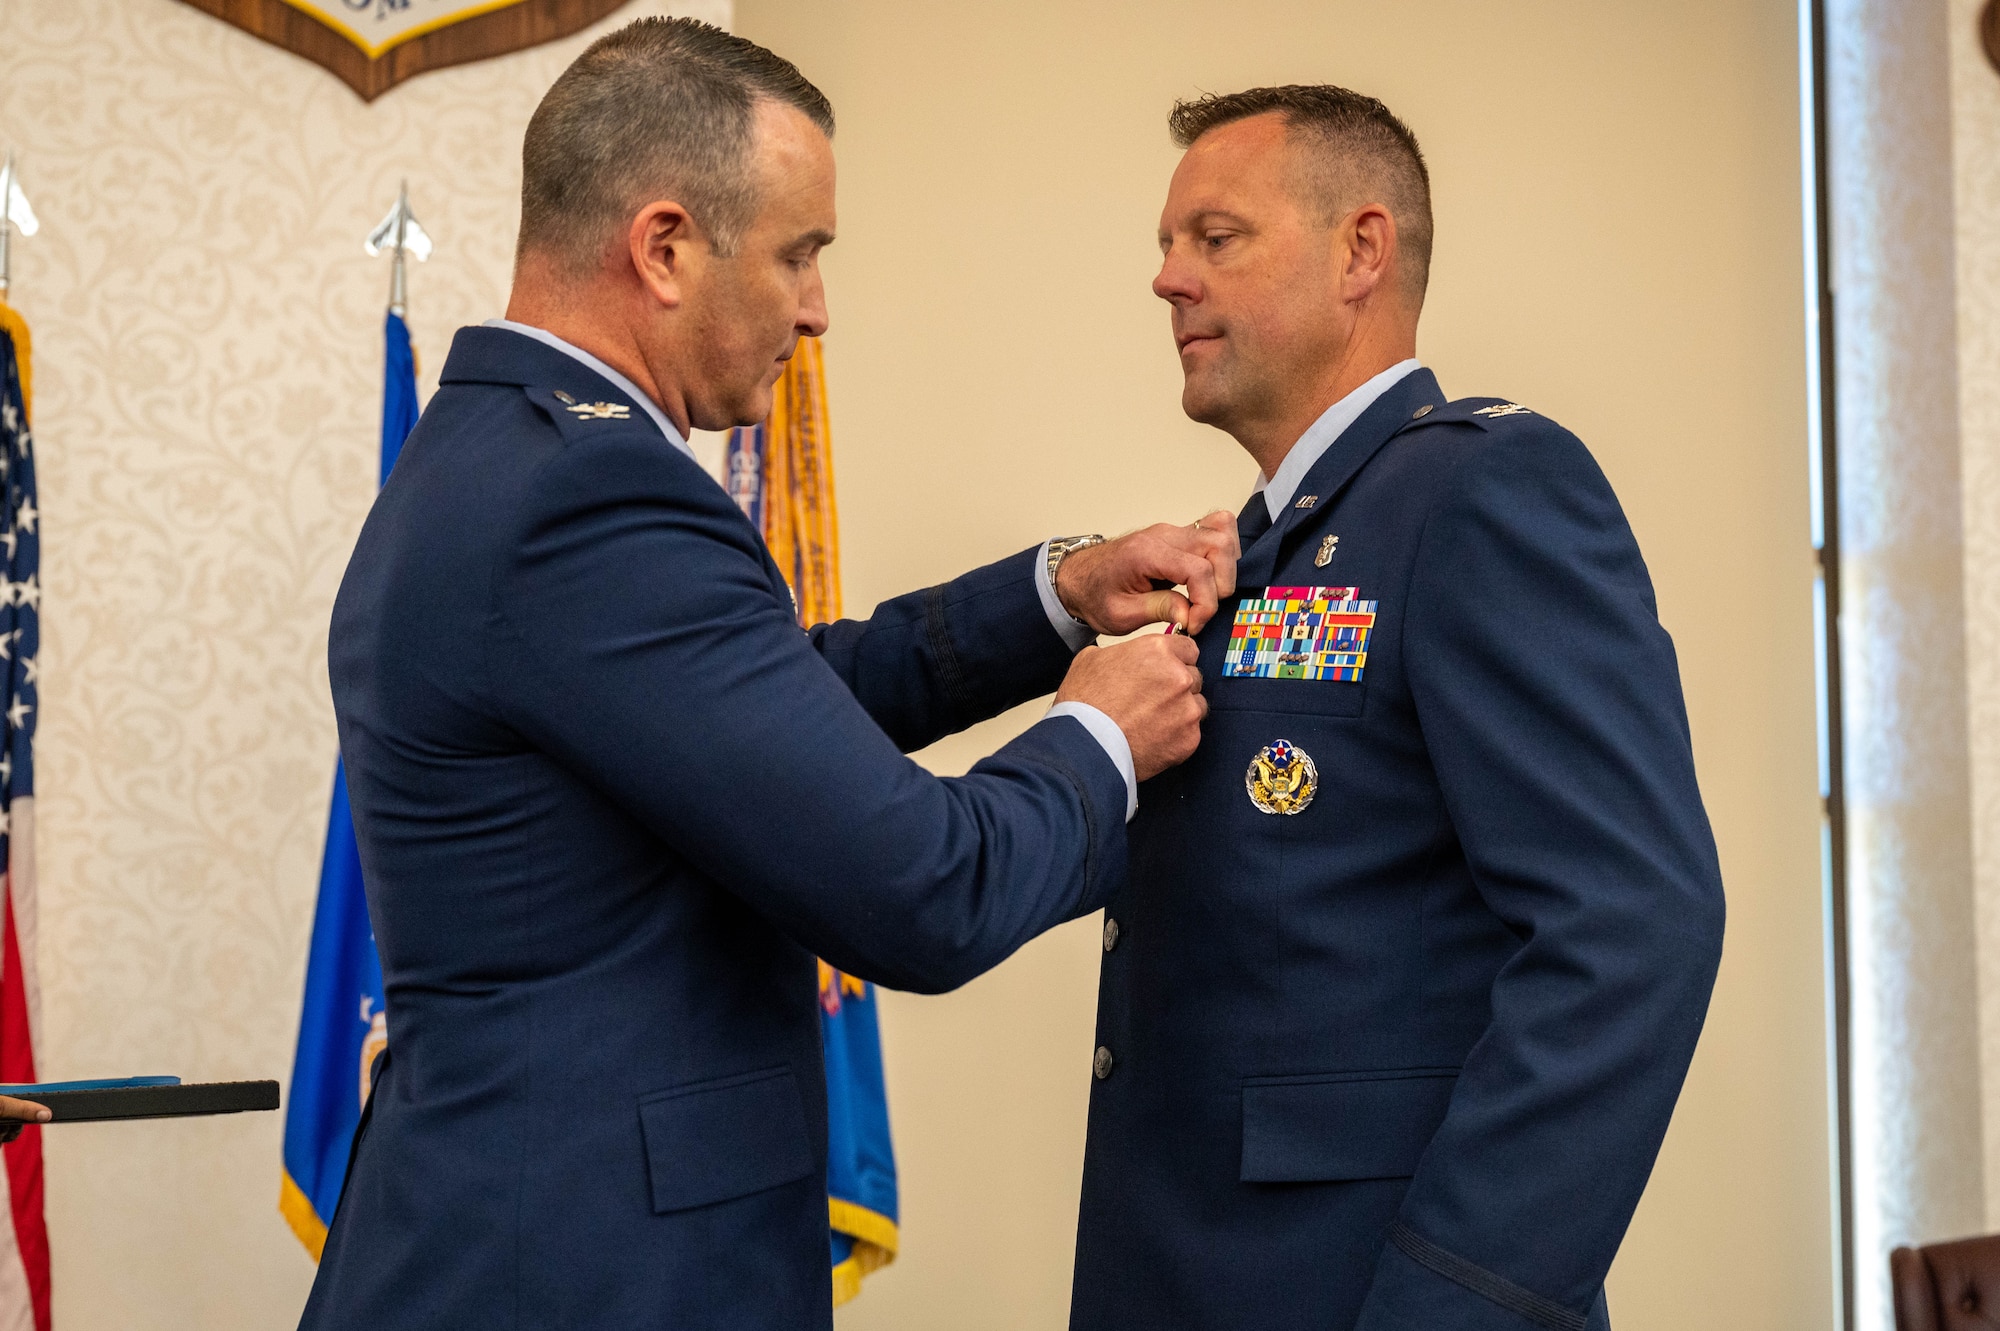 The pinning of an award during the change of command ceremony.